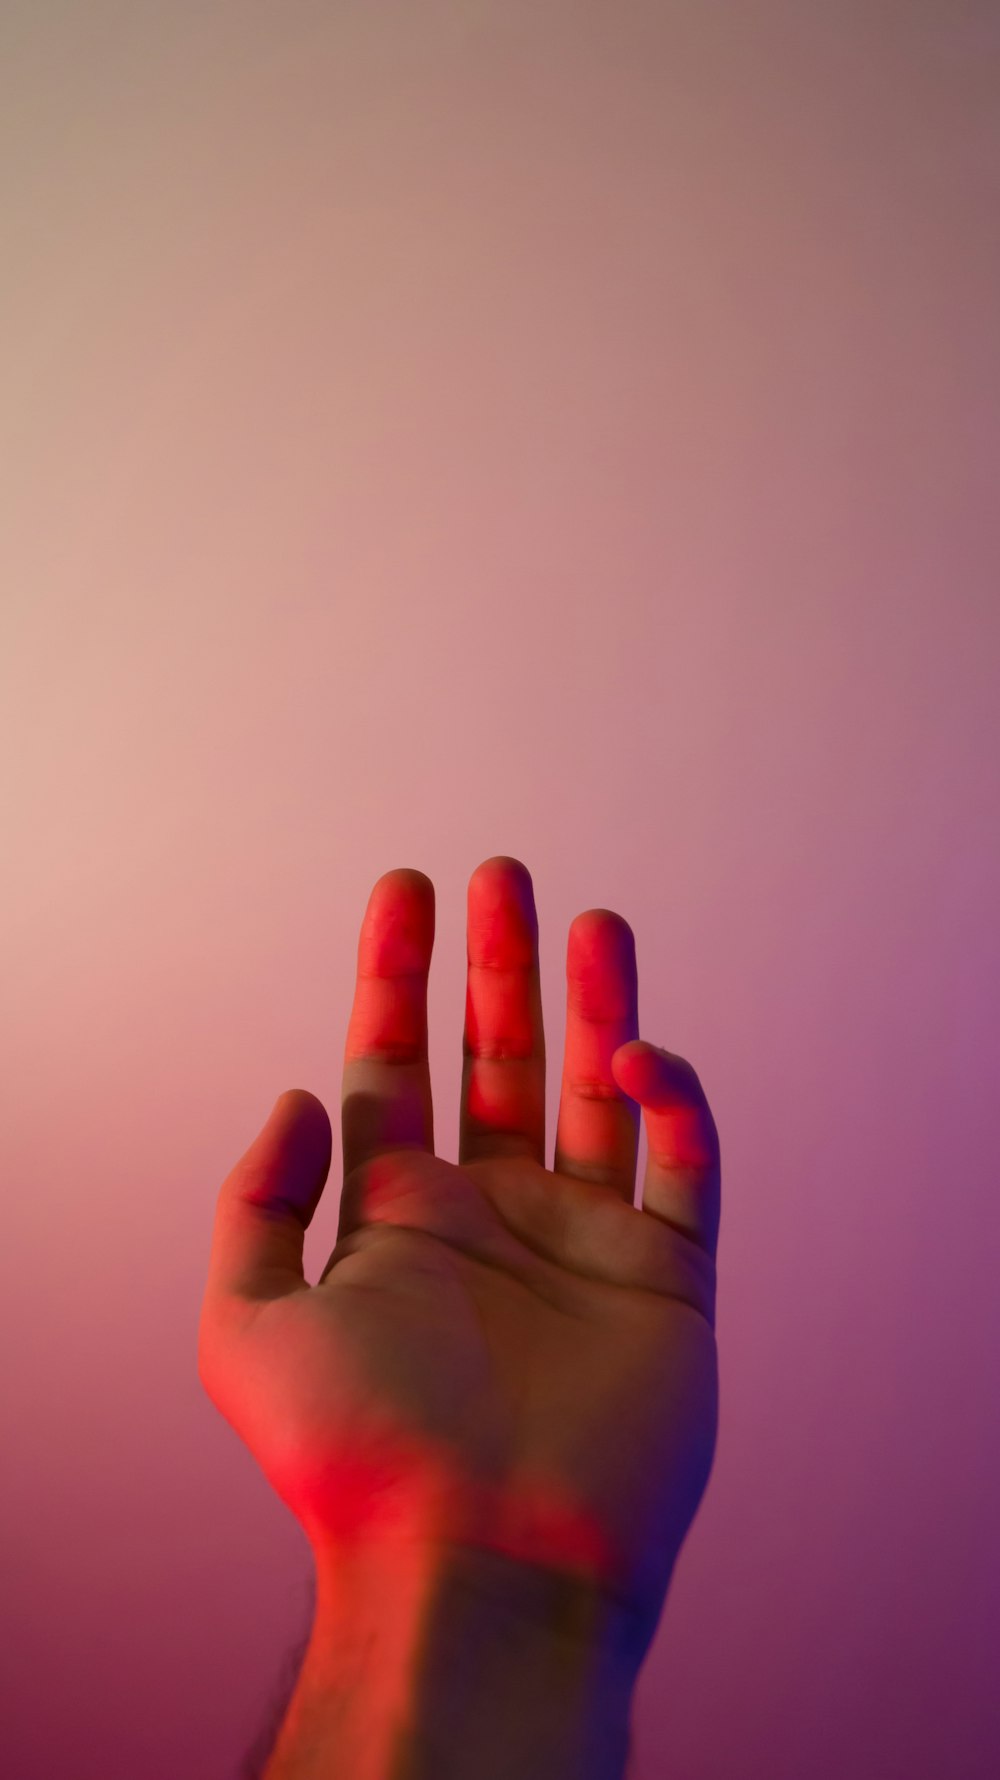 20+ Hand Pictures & Images [HD] | Download Free Photos on Unsplash